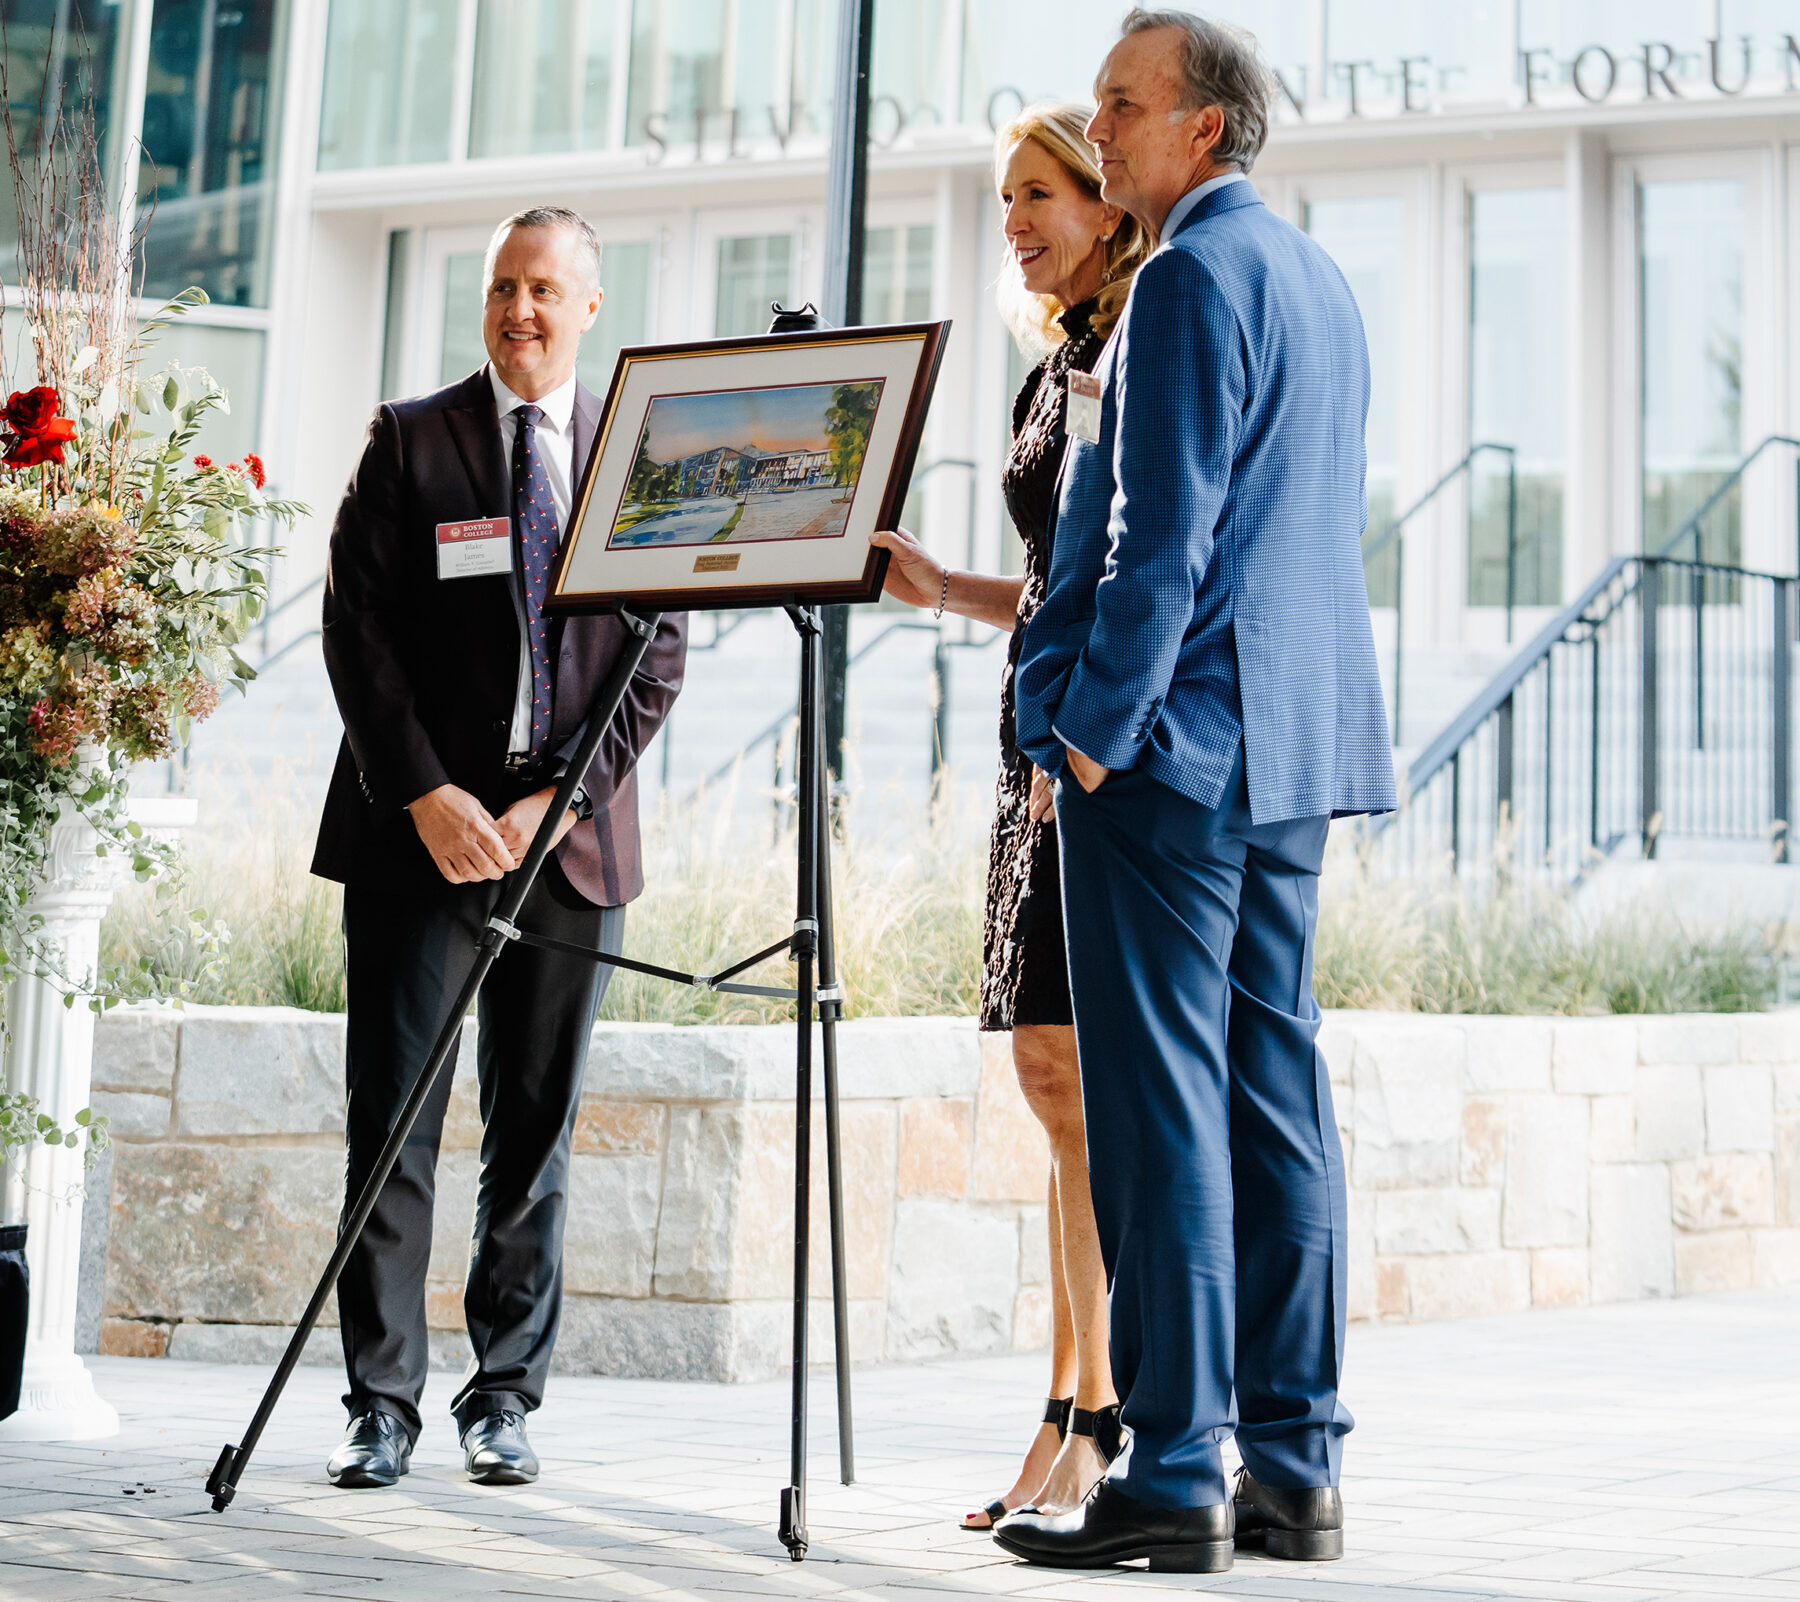 three people pose with a framed painting of the new facility